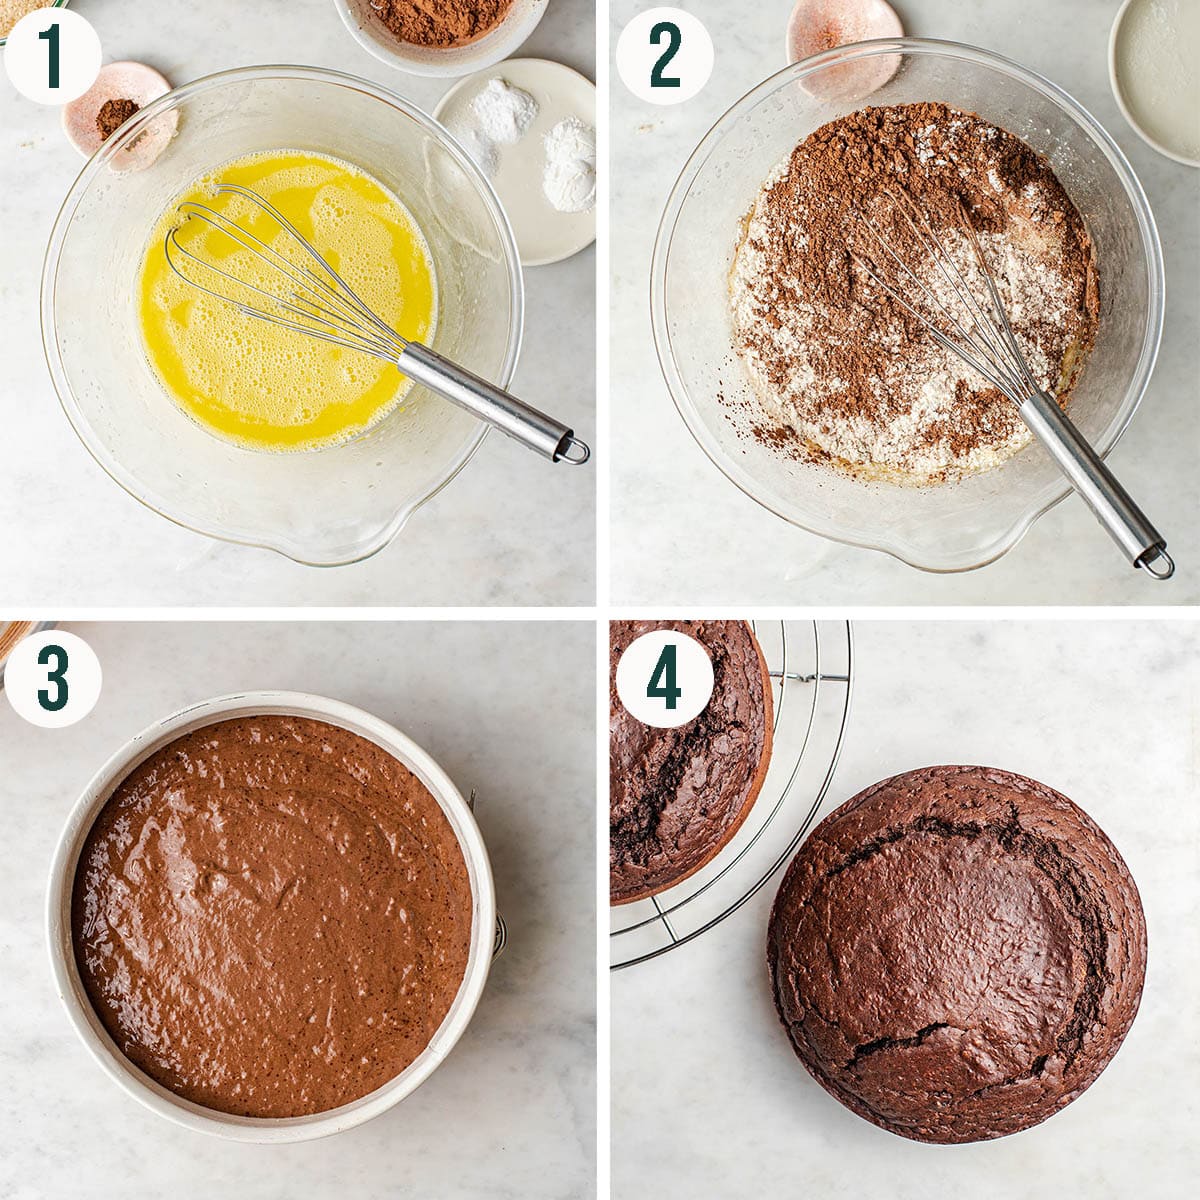 Chocolate cake steps 1 to 4, mixing the batter and before and after baking.